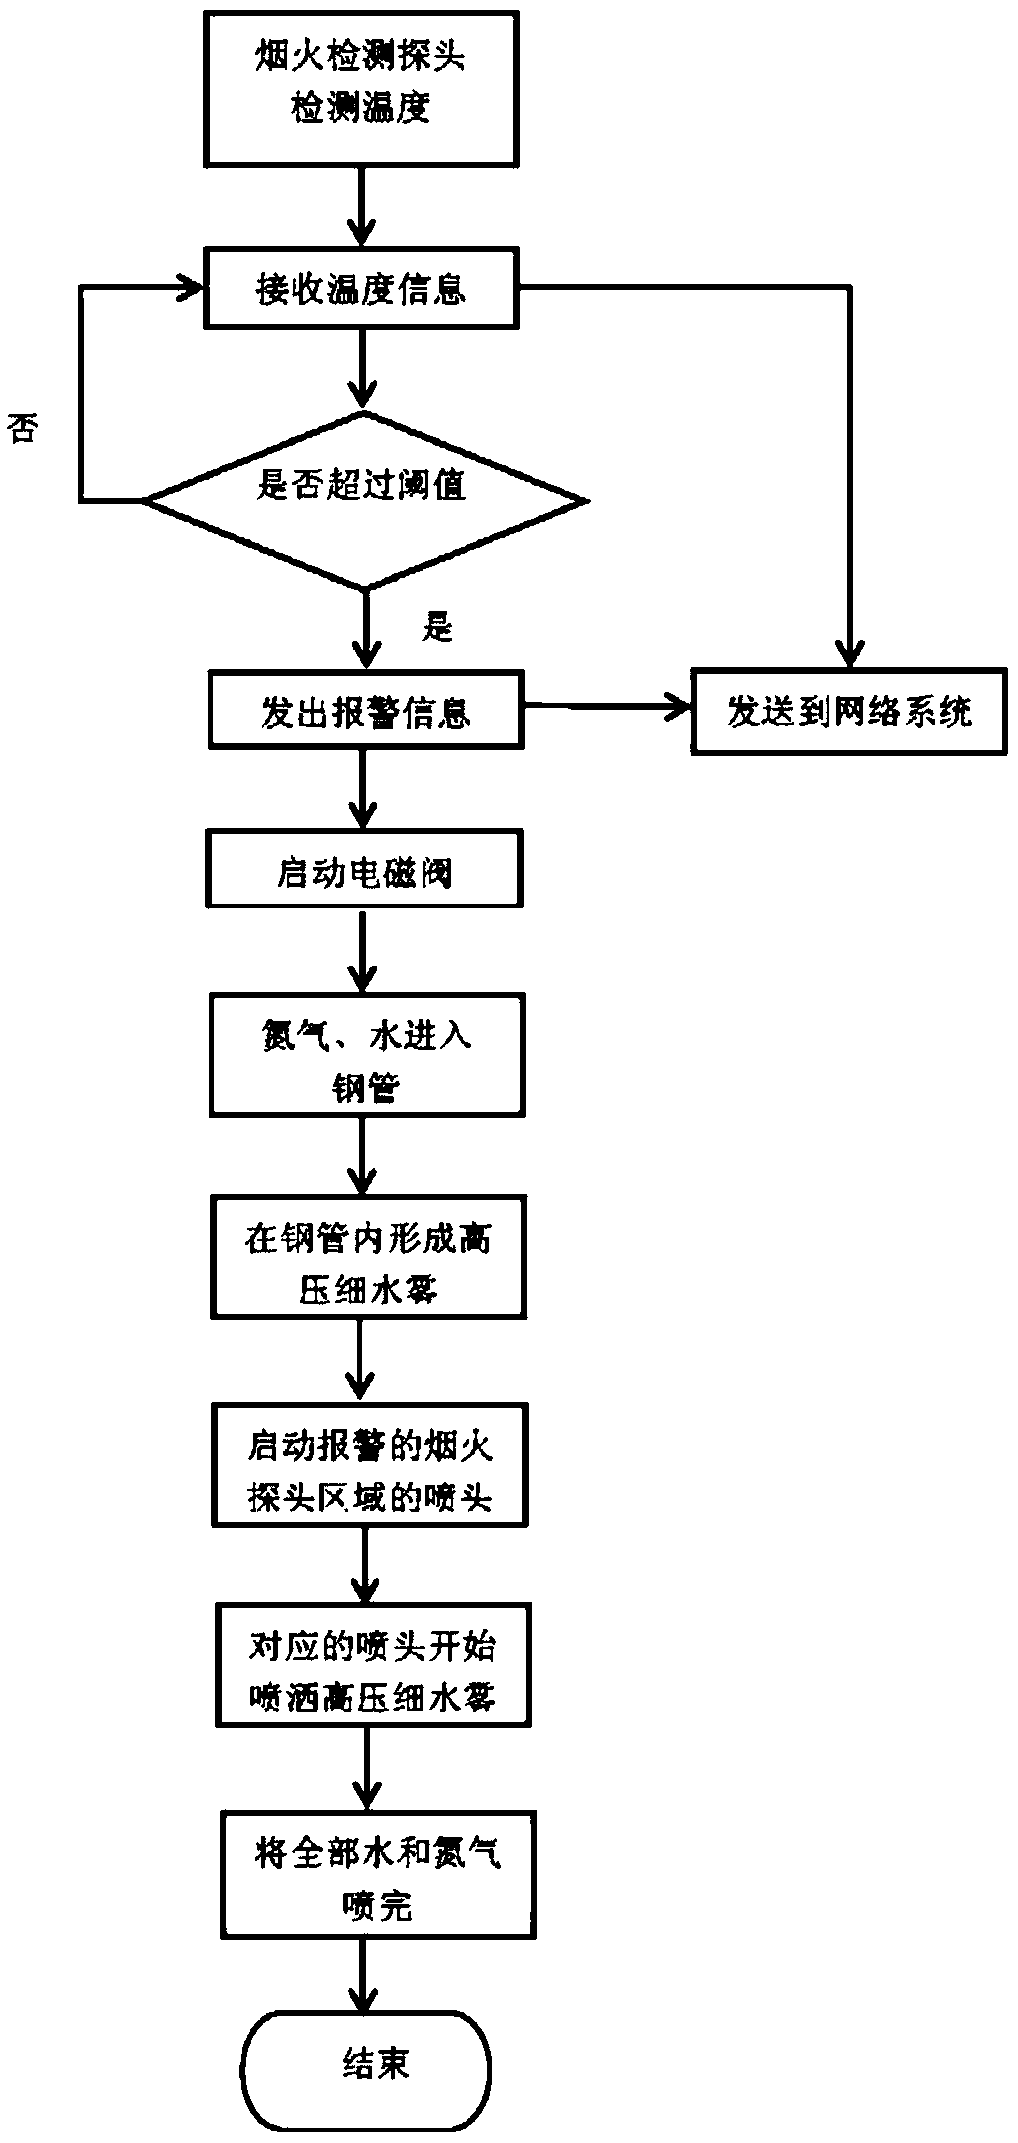 Distributed active fire extinguishing system for railway vehicle and control method